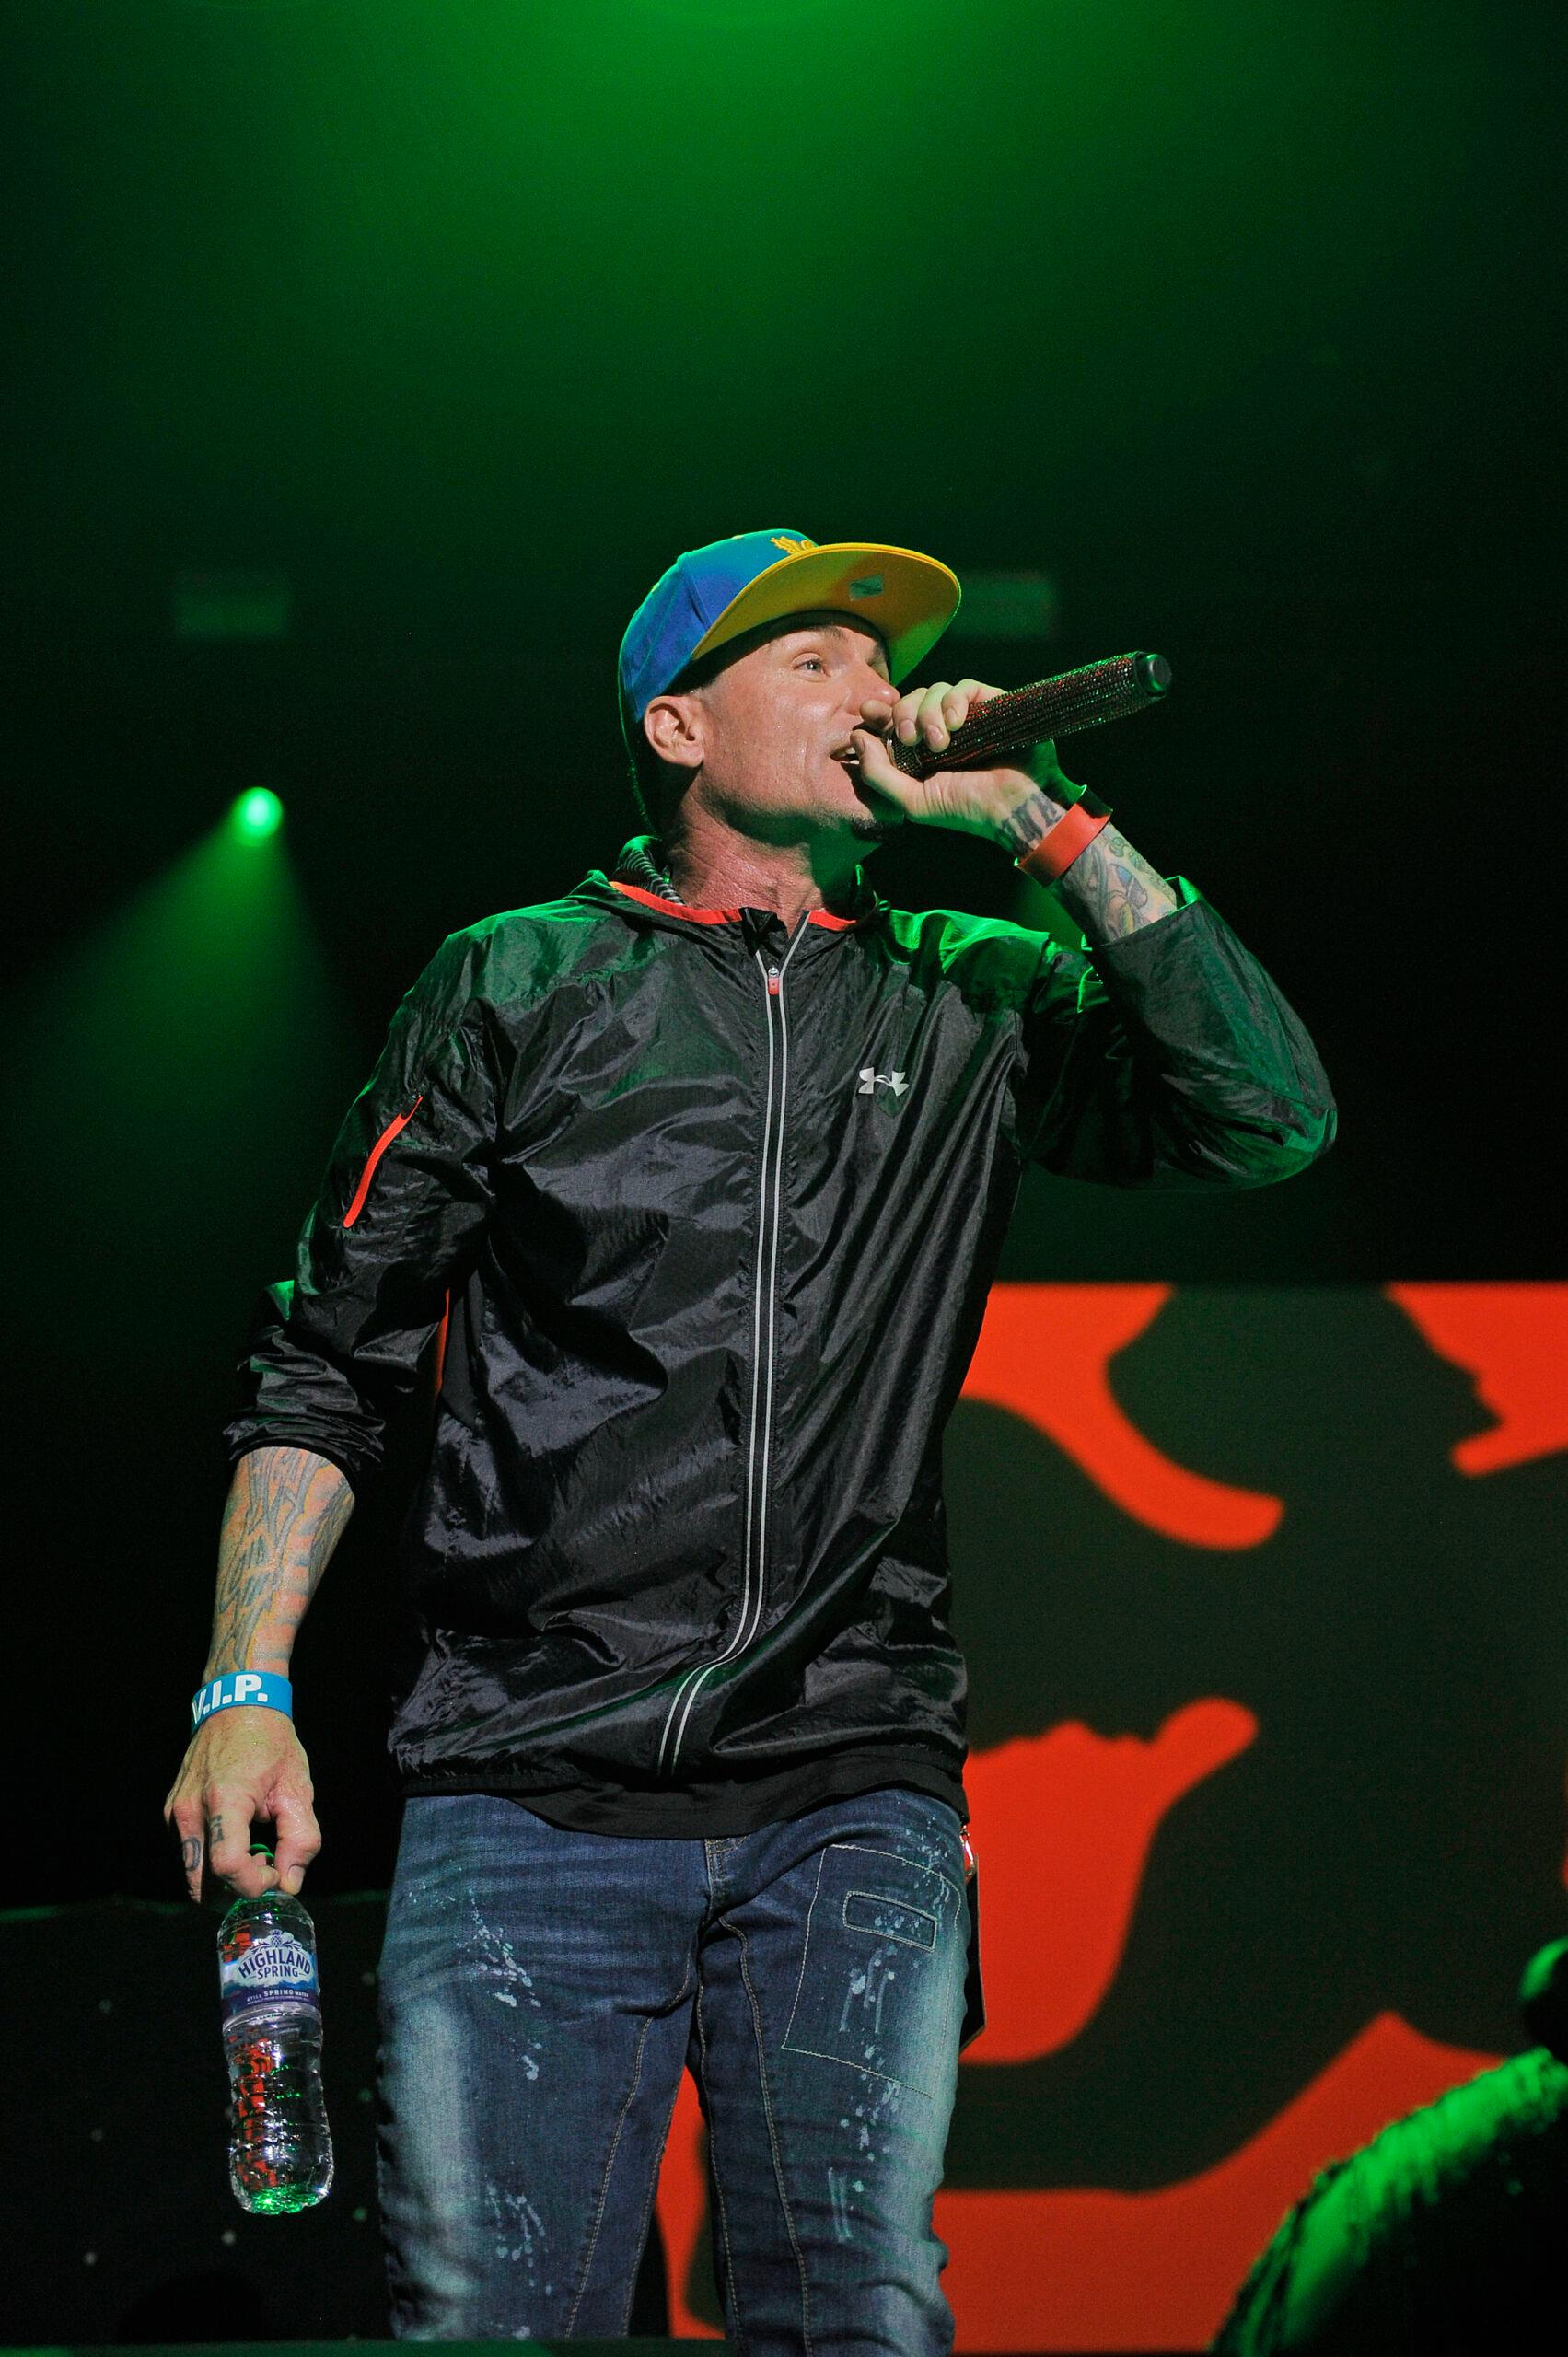 Vanilla Ice performing durinf apos I Love The 90 apos s apos at SSE Arena